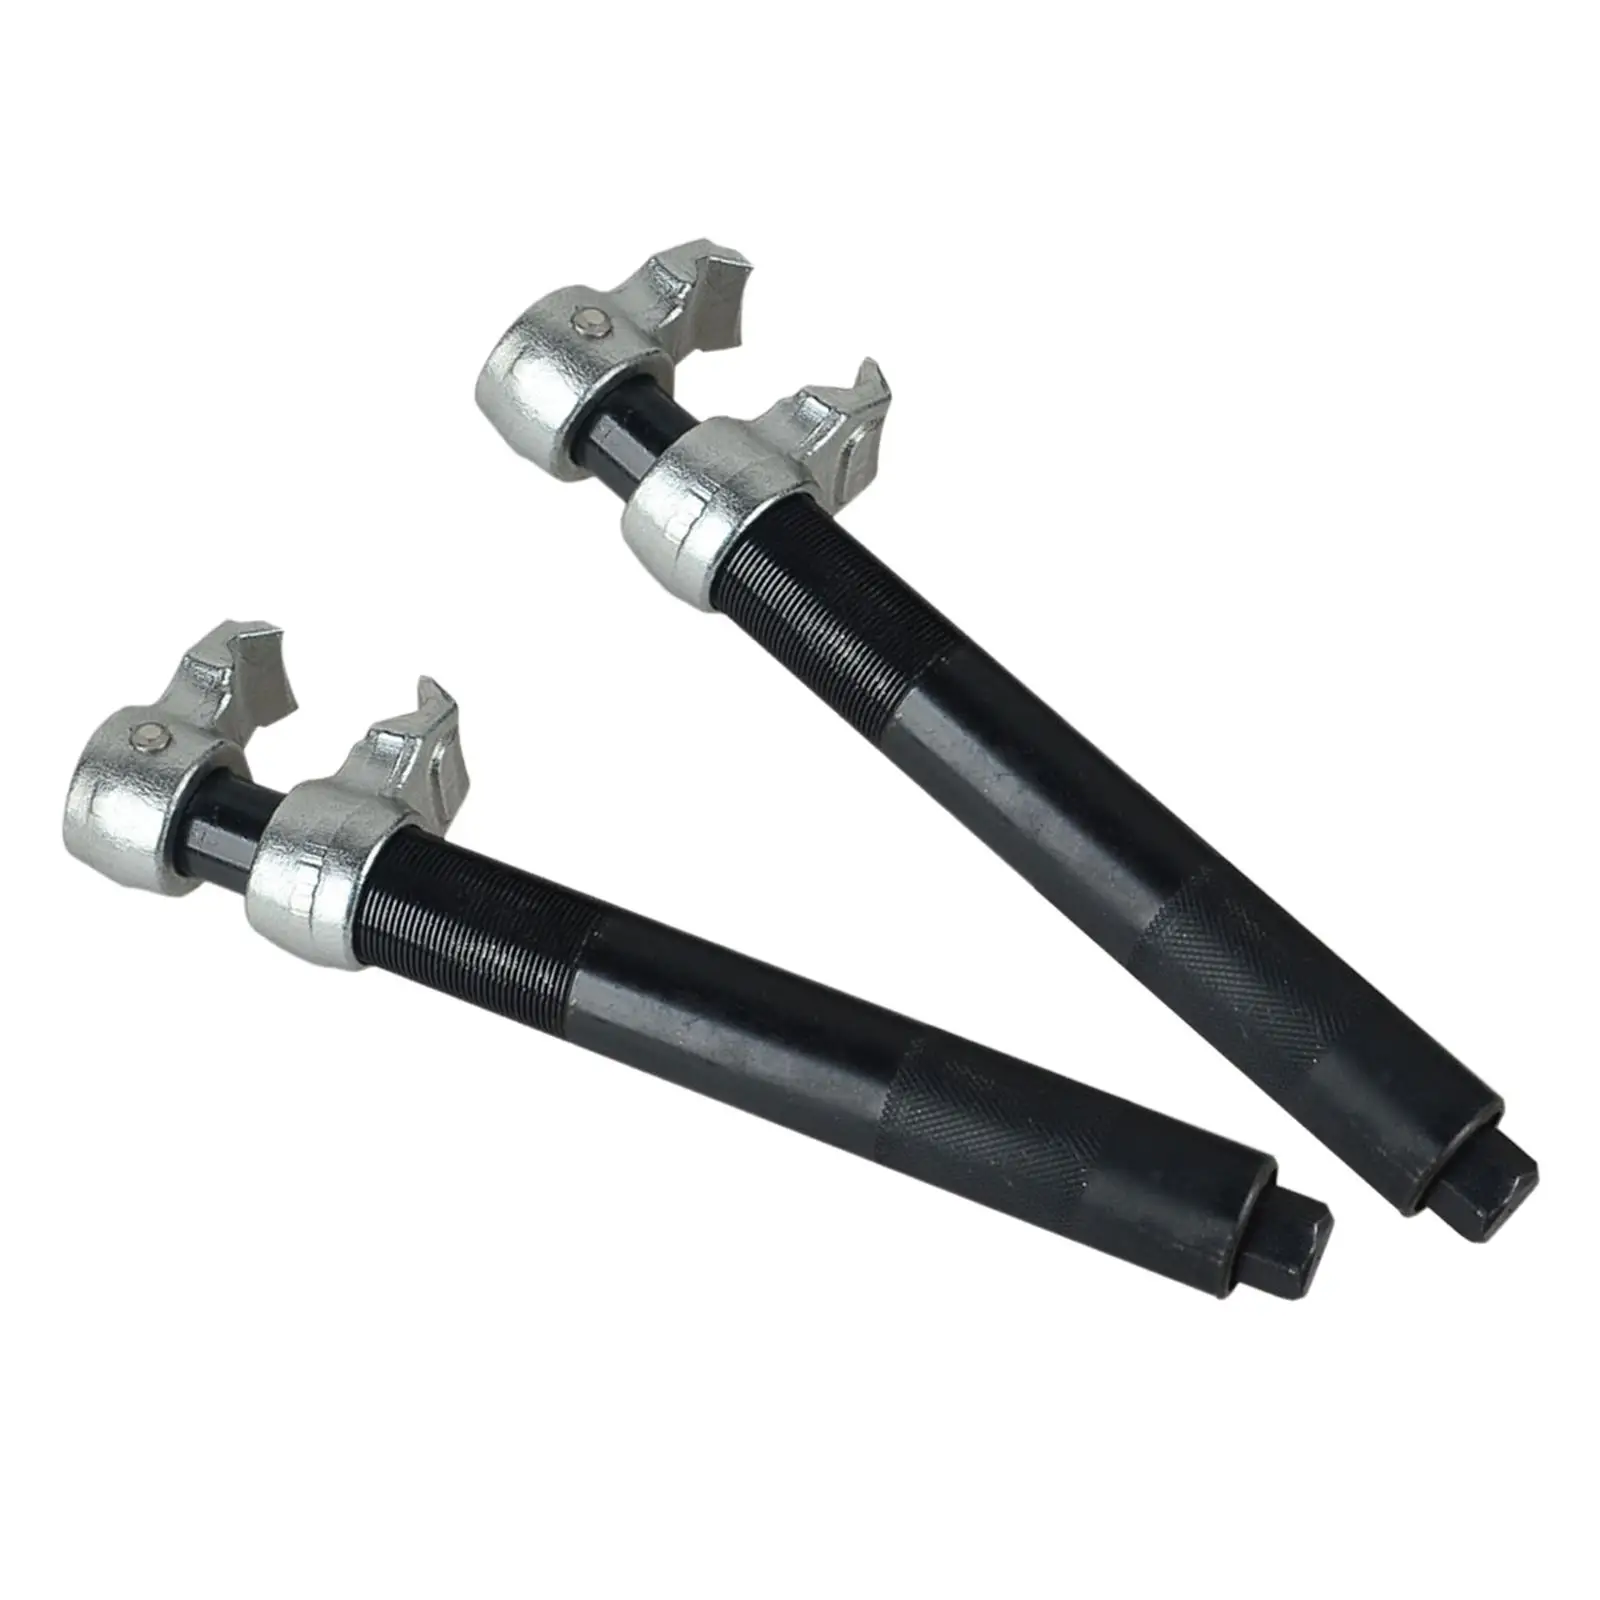 Compressor Adjustable with 2 Steel Jaw Claws Premium Replaces